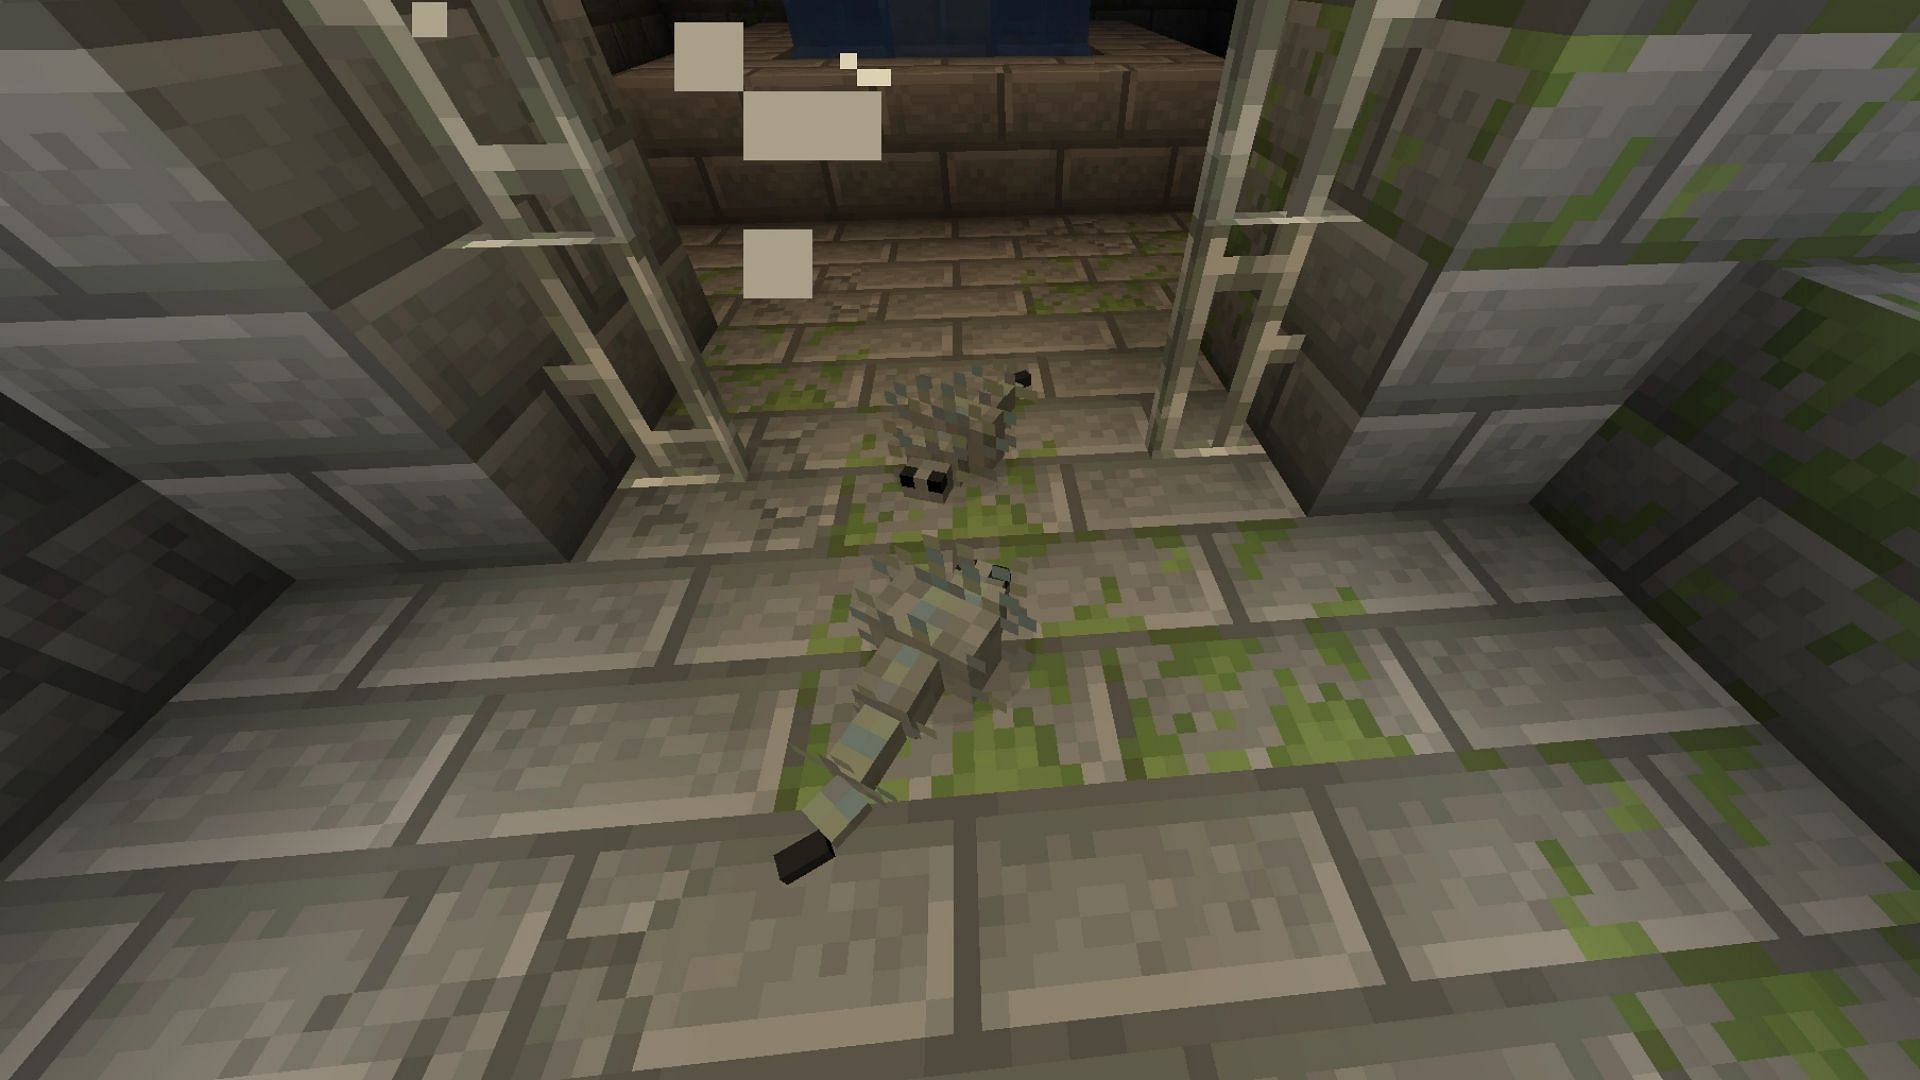 Dying while fighting with silverfish can be one of the most annoying things in Minecraft (Image via Mojang)